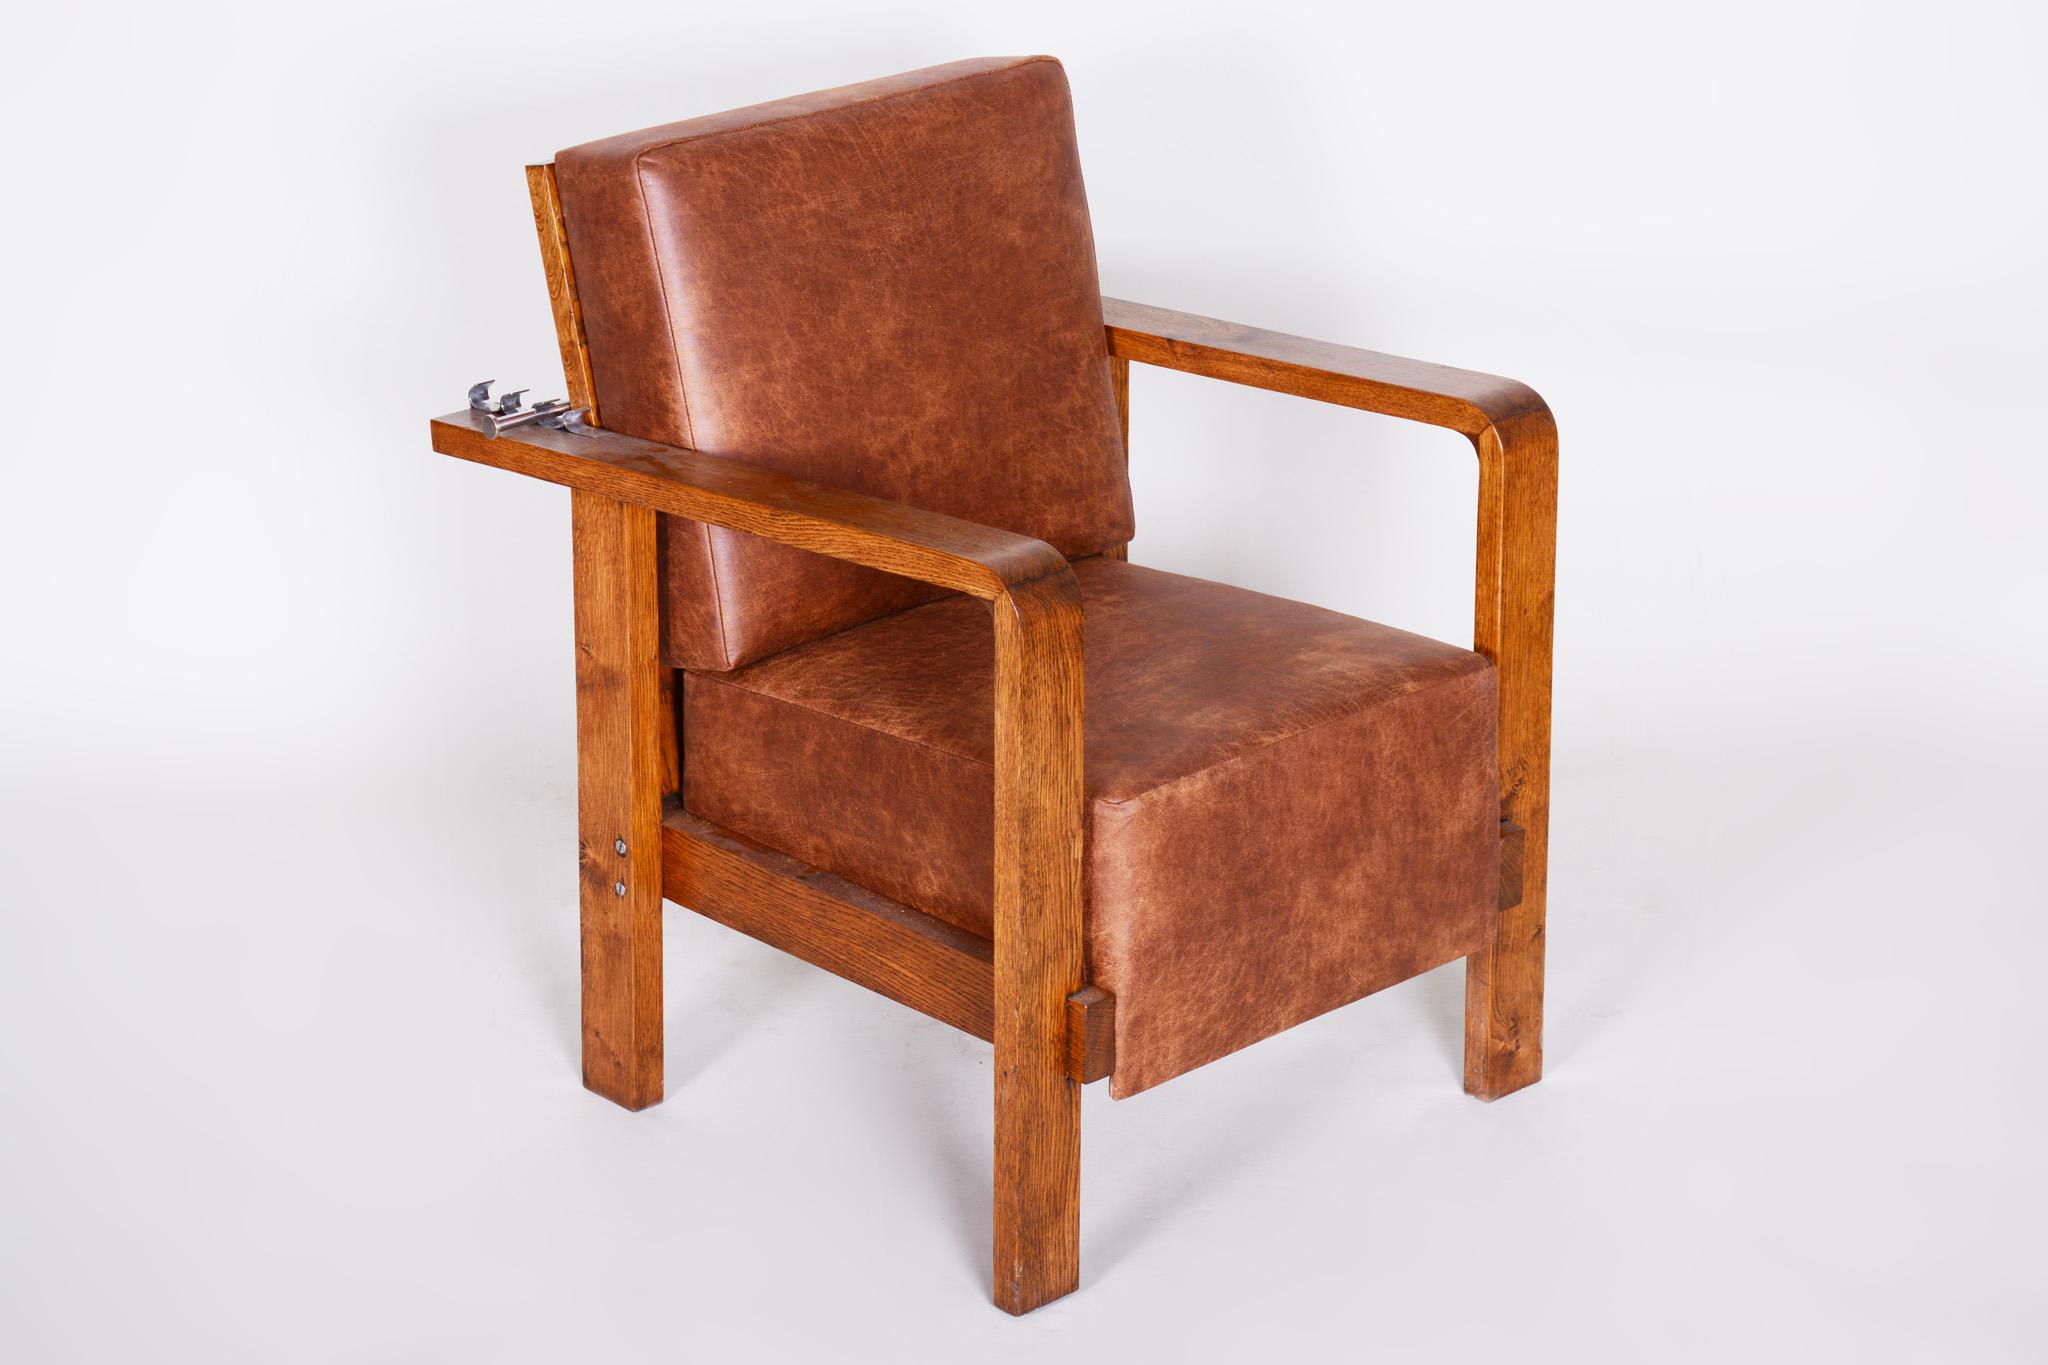 Pair of Czech Adjustable Functionalist Leather and Oak Armchairs, 1930s For Sale 5